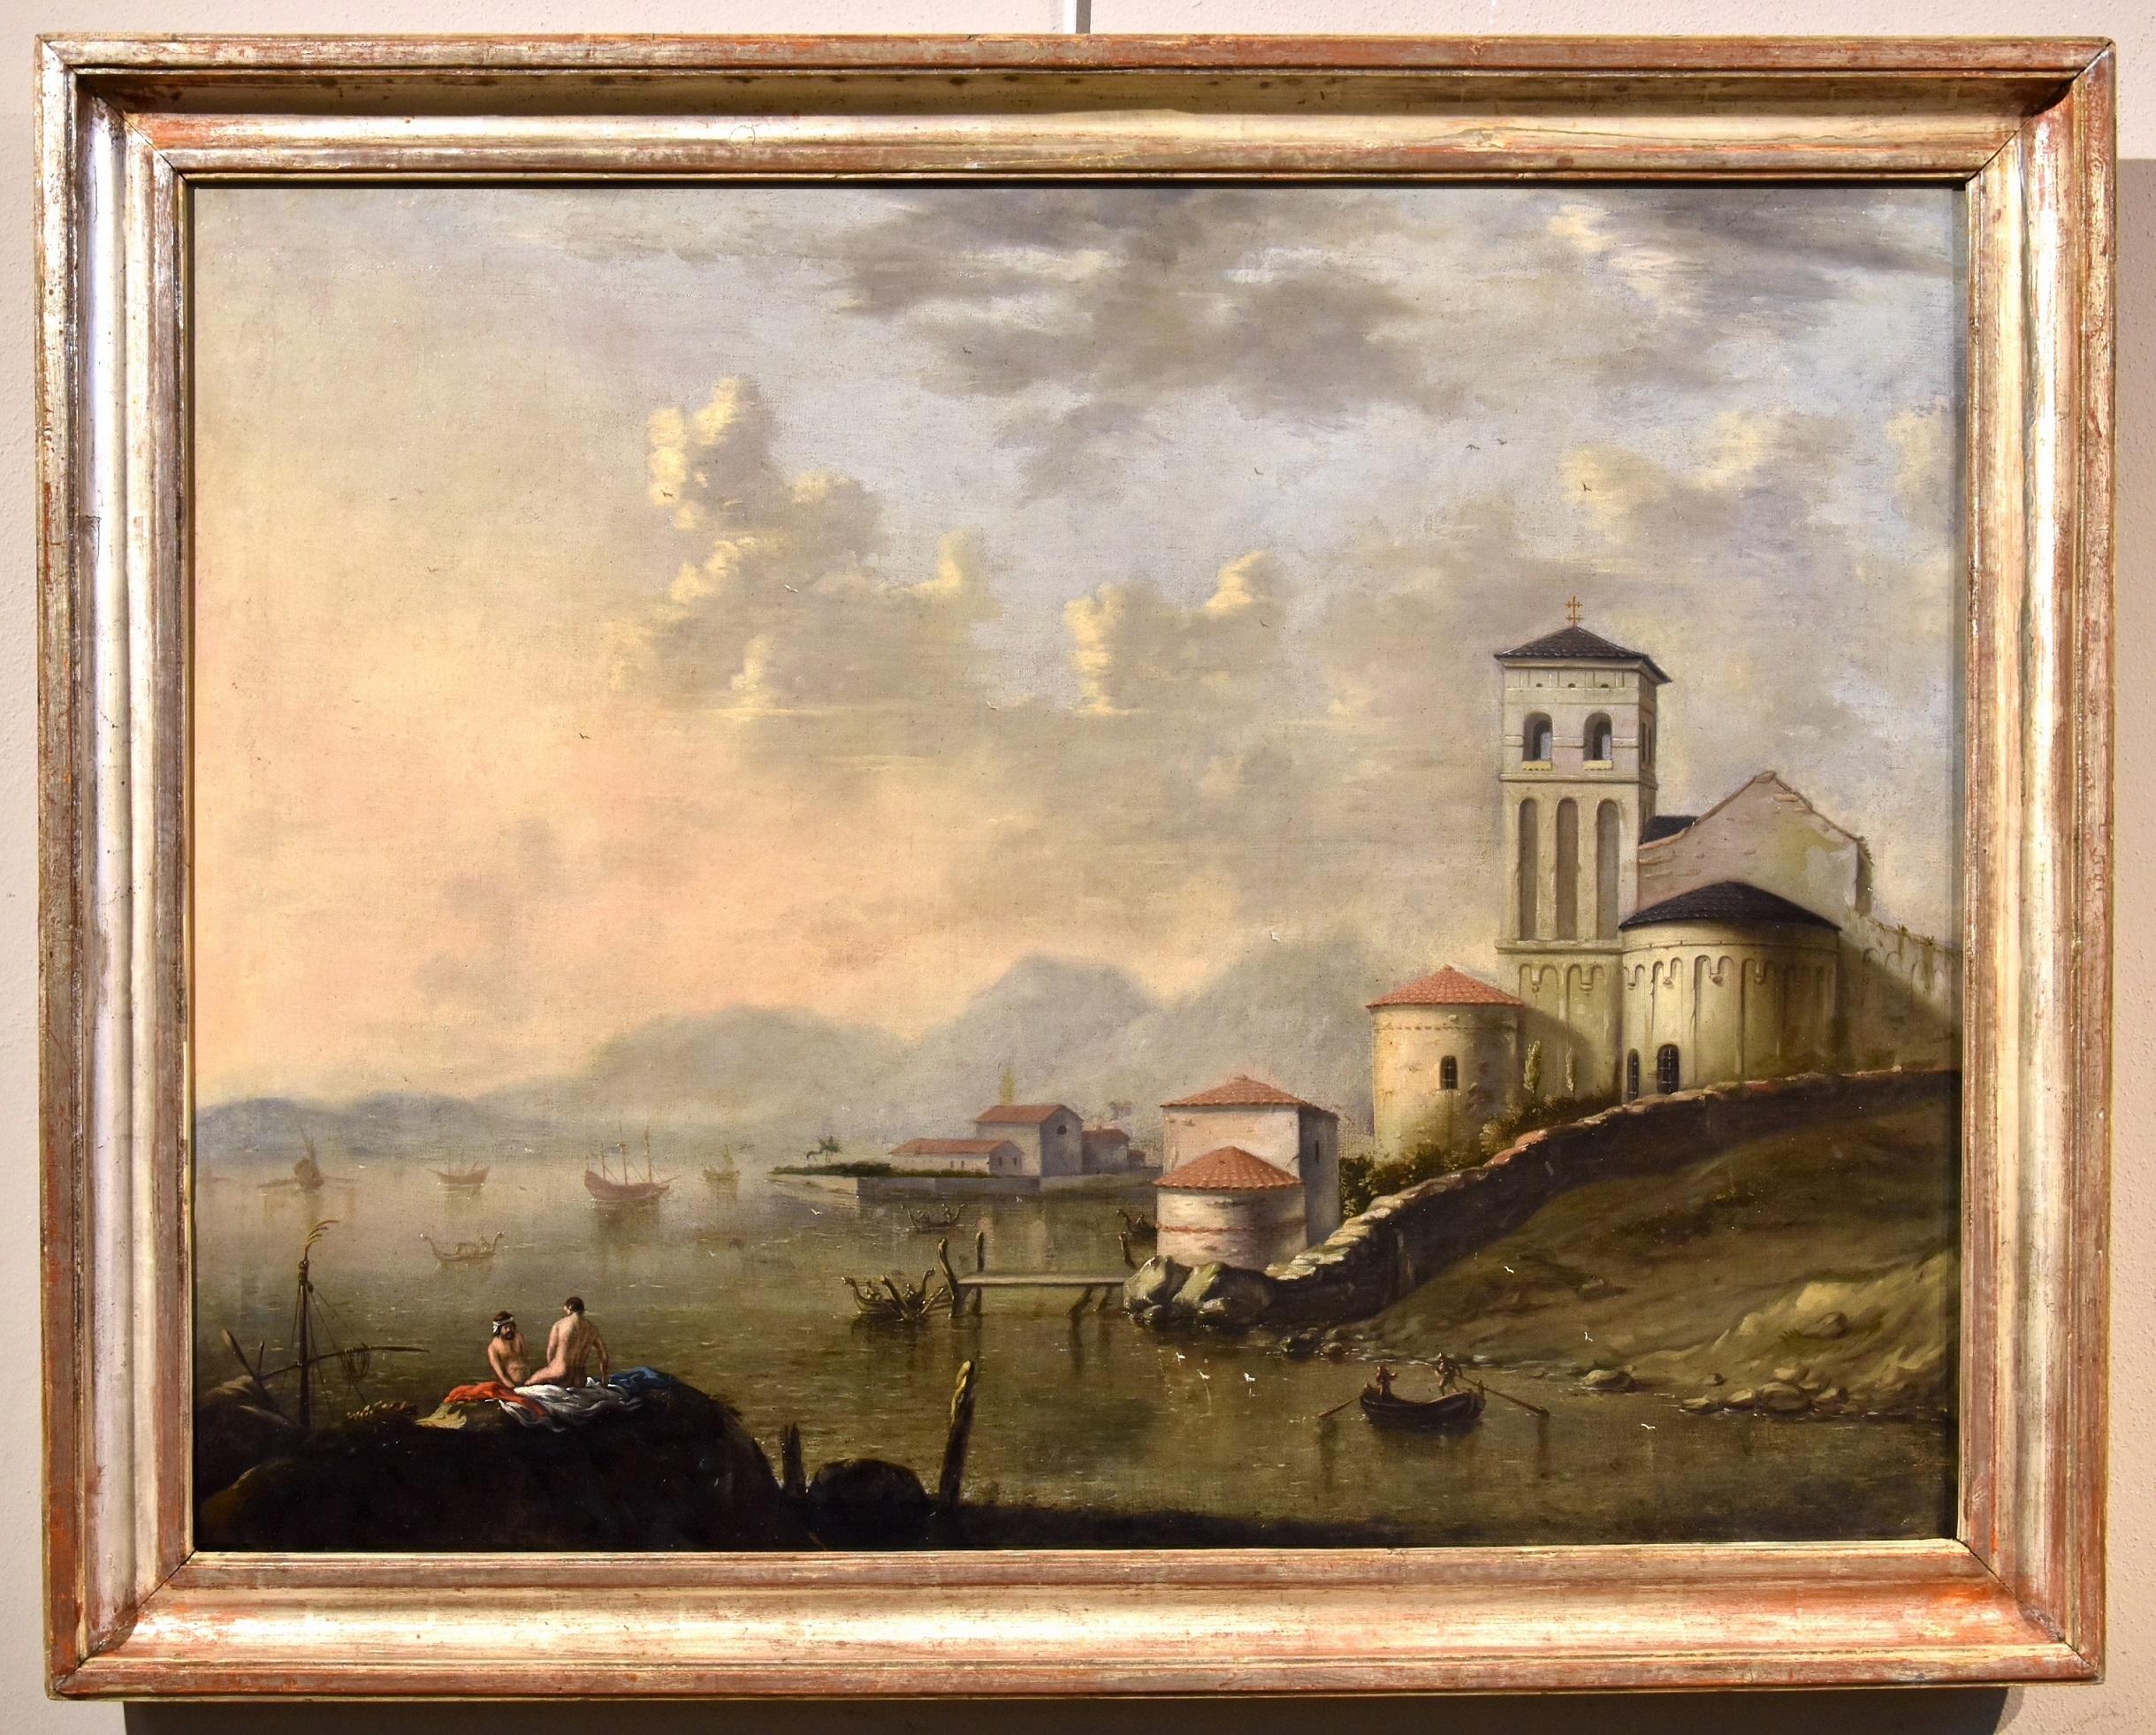 Flemish painter active in Italy in the eighteenth century Landscape Painting - Landscape See Paint Oil on canvas Flemish Old master 18th Century Italian Art